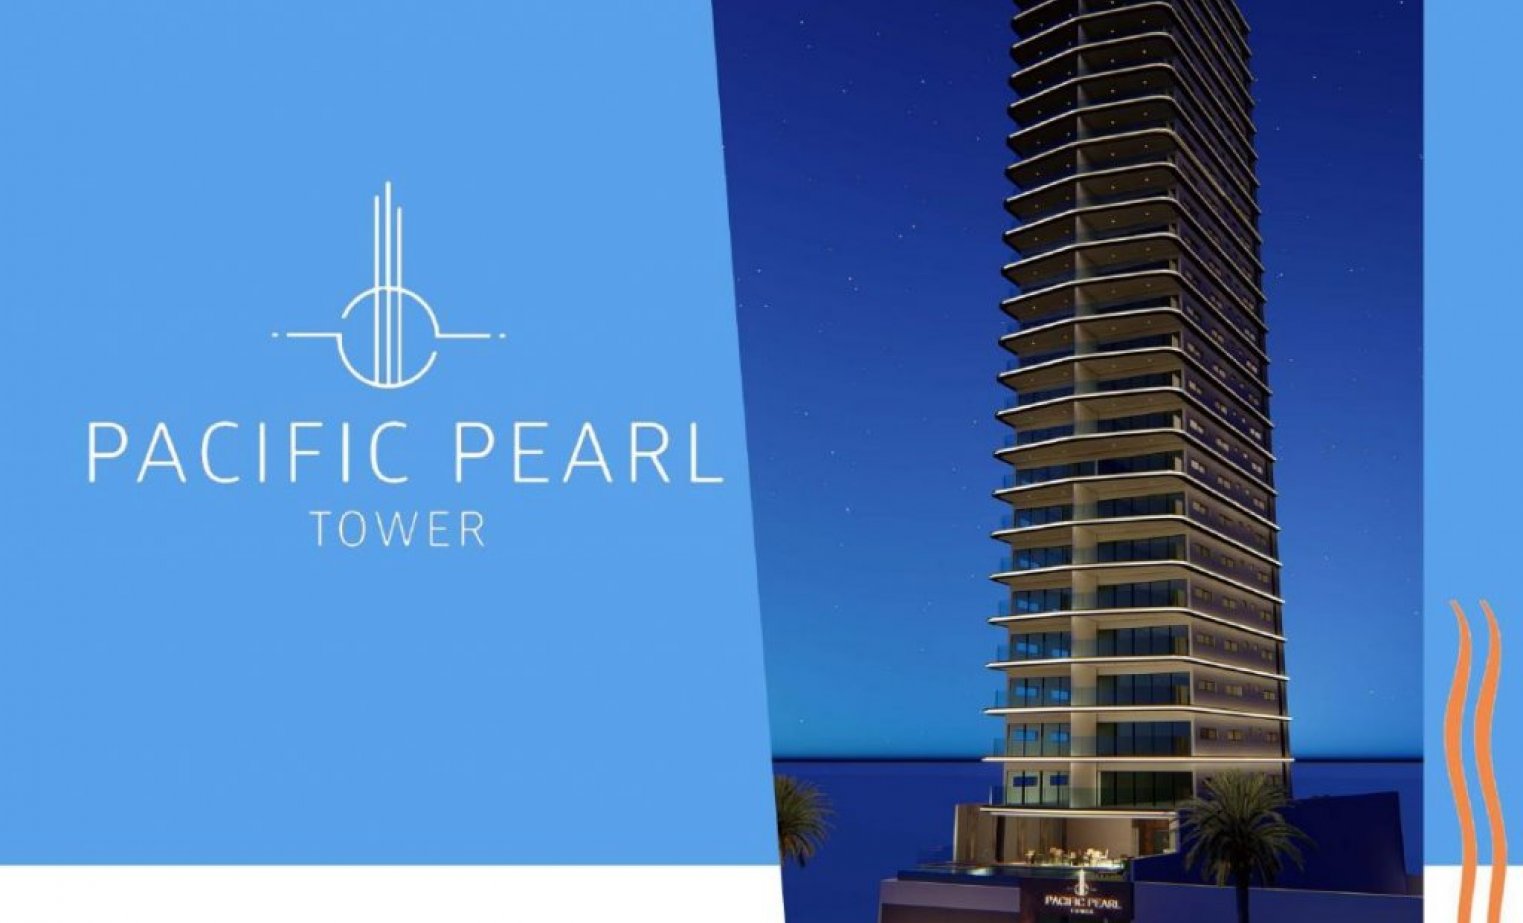 PACIFIC PEARL TOWER